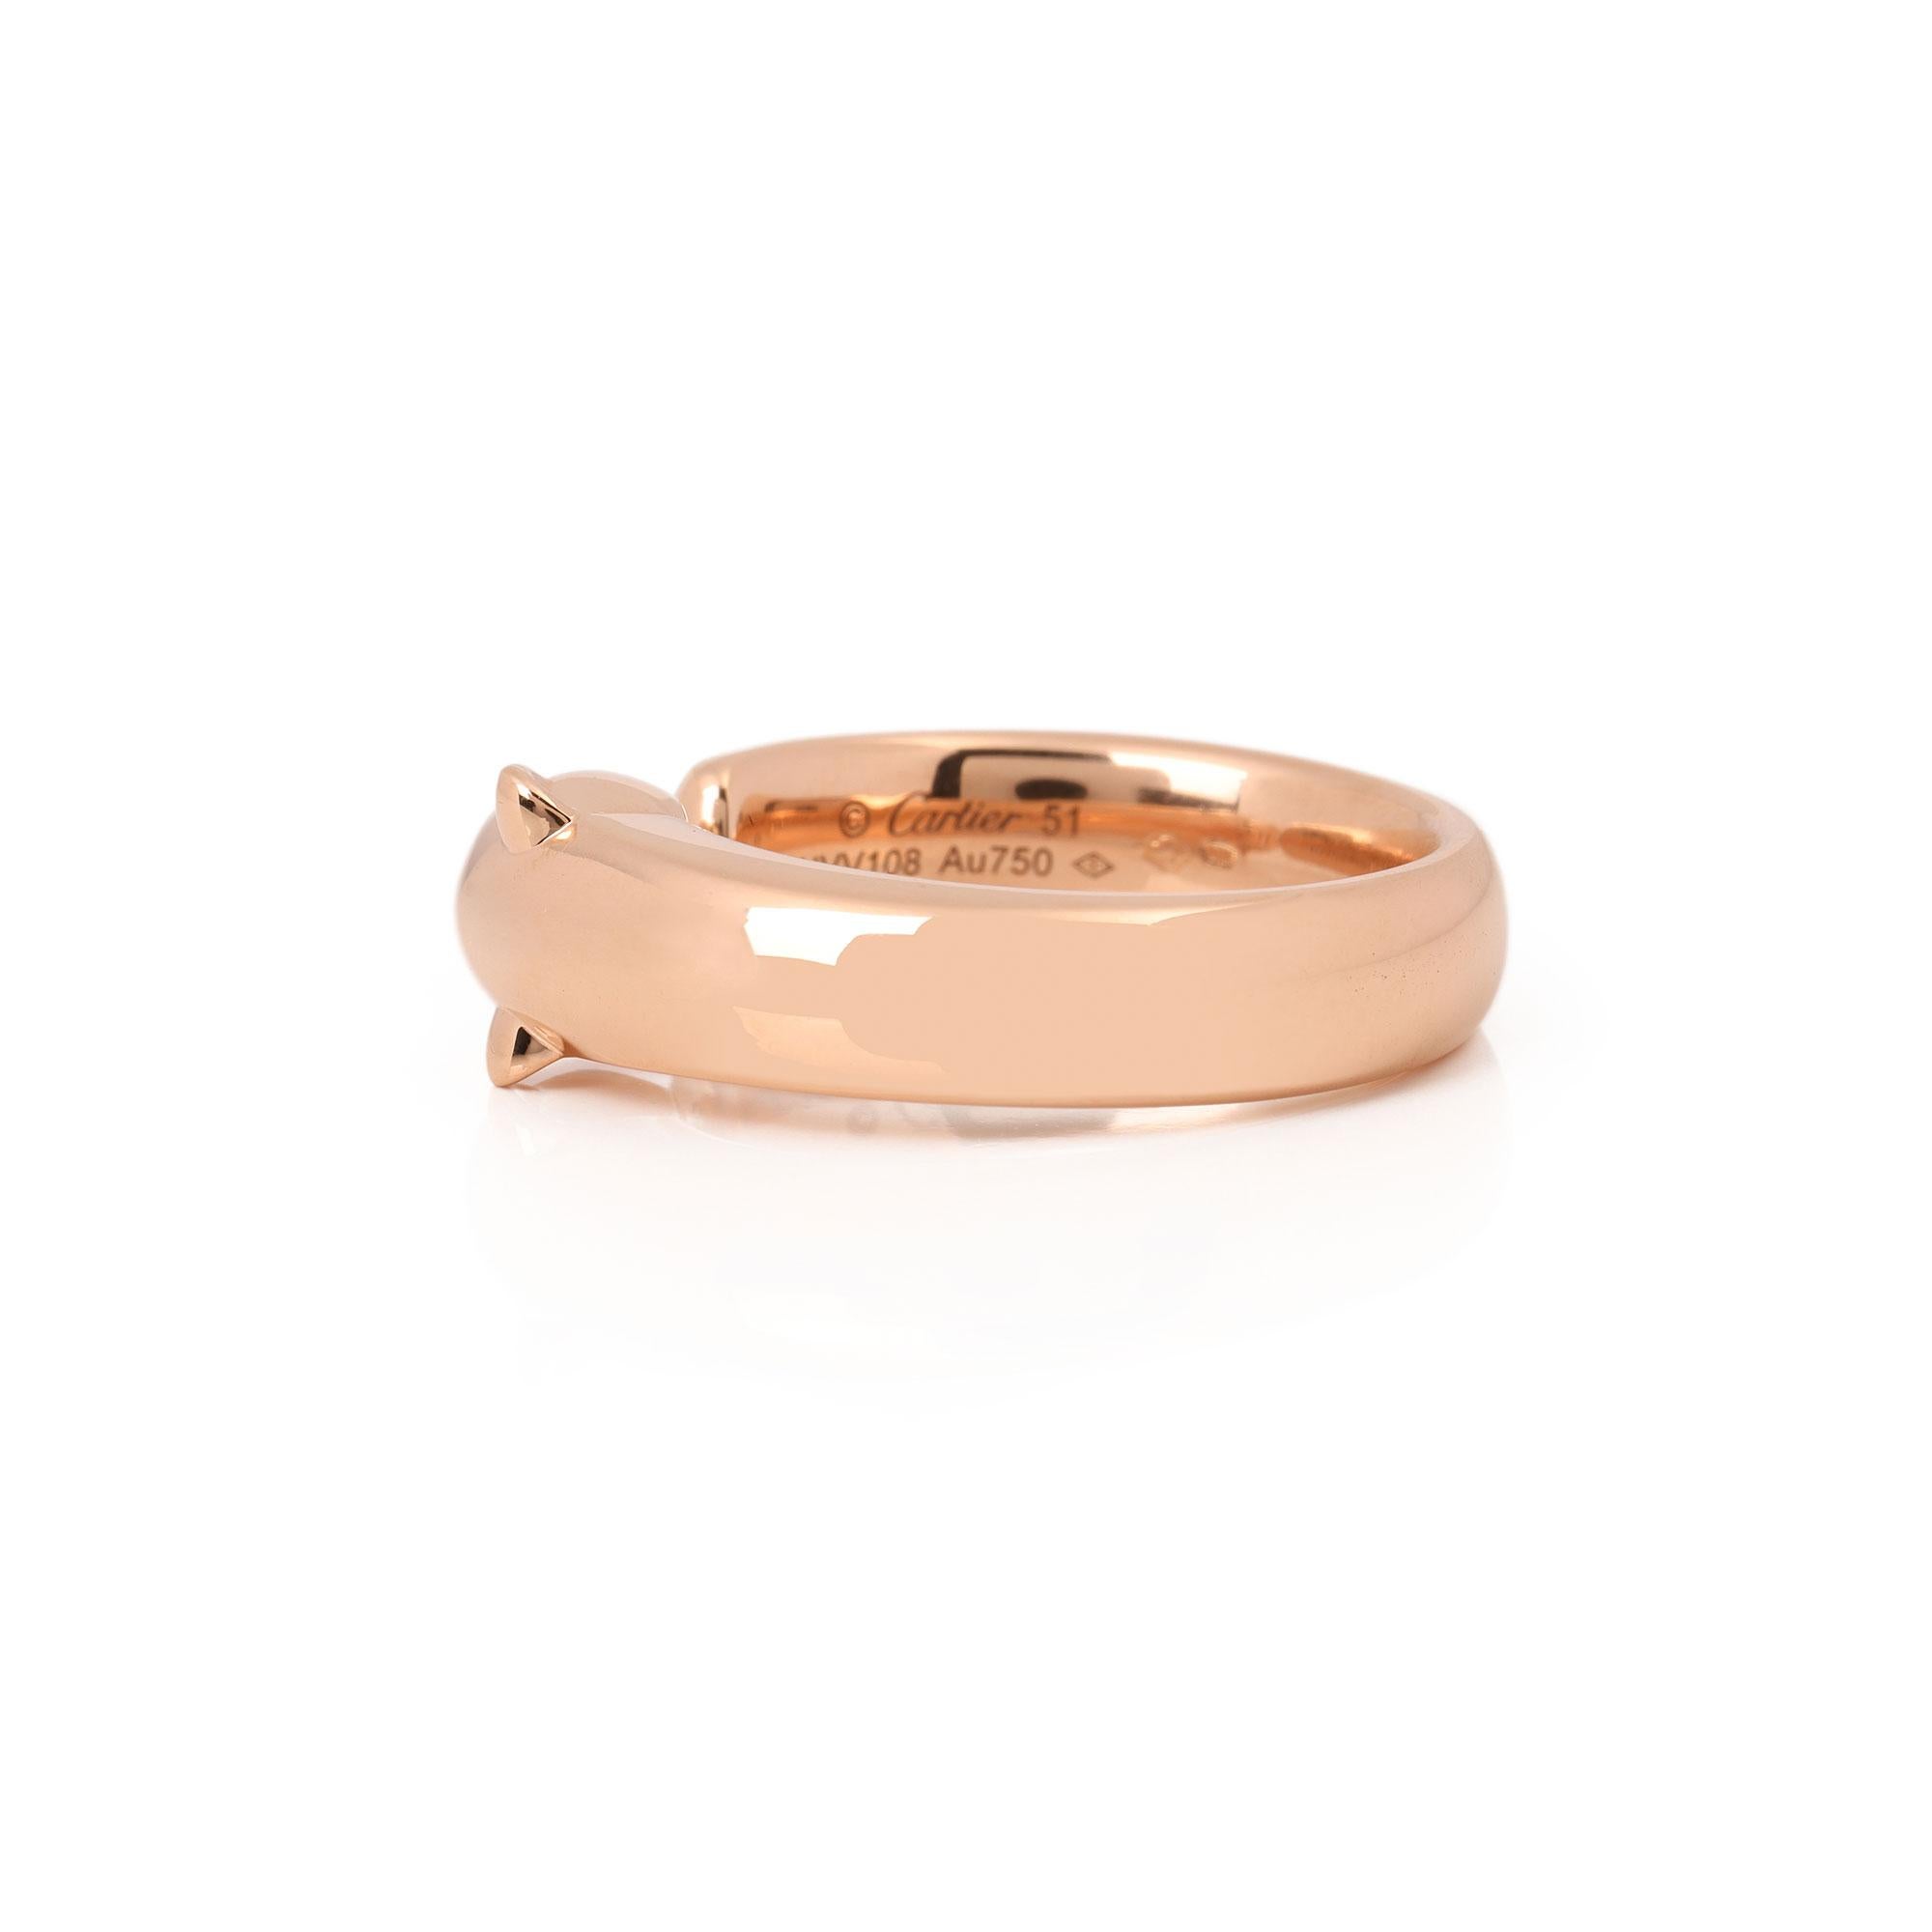 This ring by Cartier is from their Panthere collection and features 2 tsavorite garnets set in 18ct rose gold. It is Cartier size 51 and comes complete with box, certificate and original purchase invoice. Our Xupes reference is J545 should you need